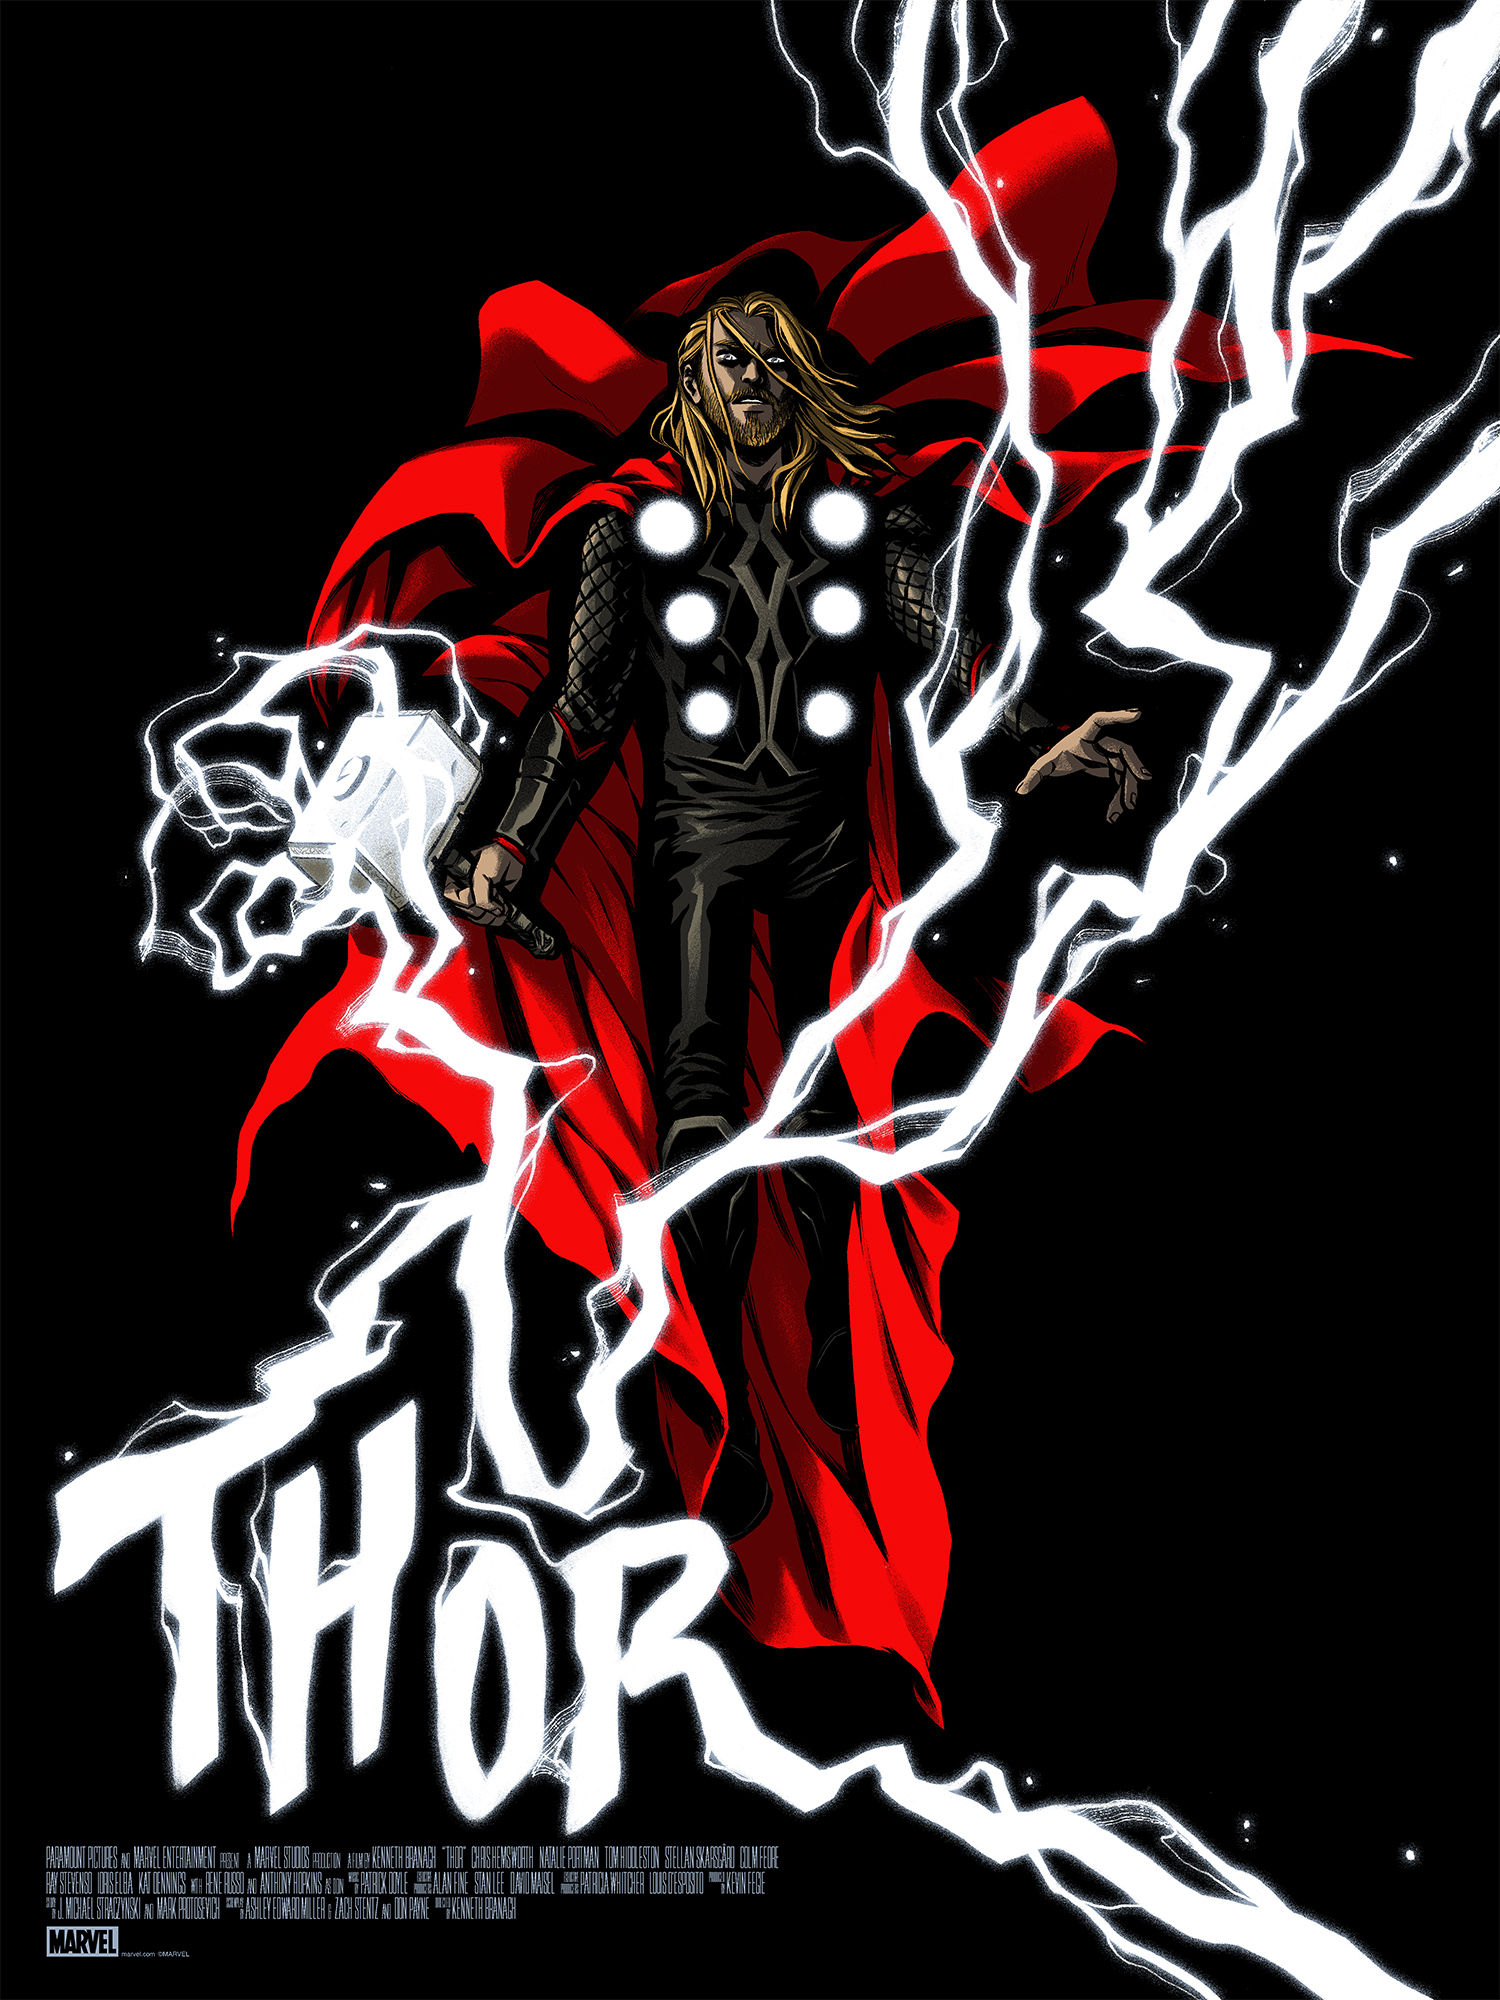 Thor by Cloonan